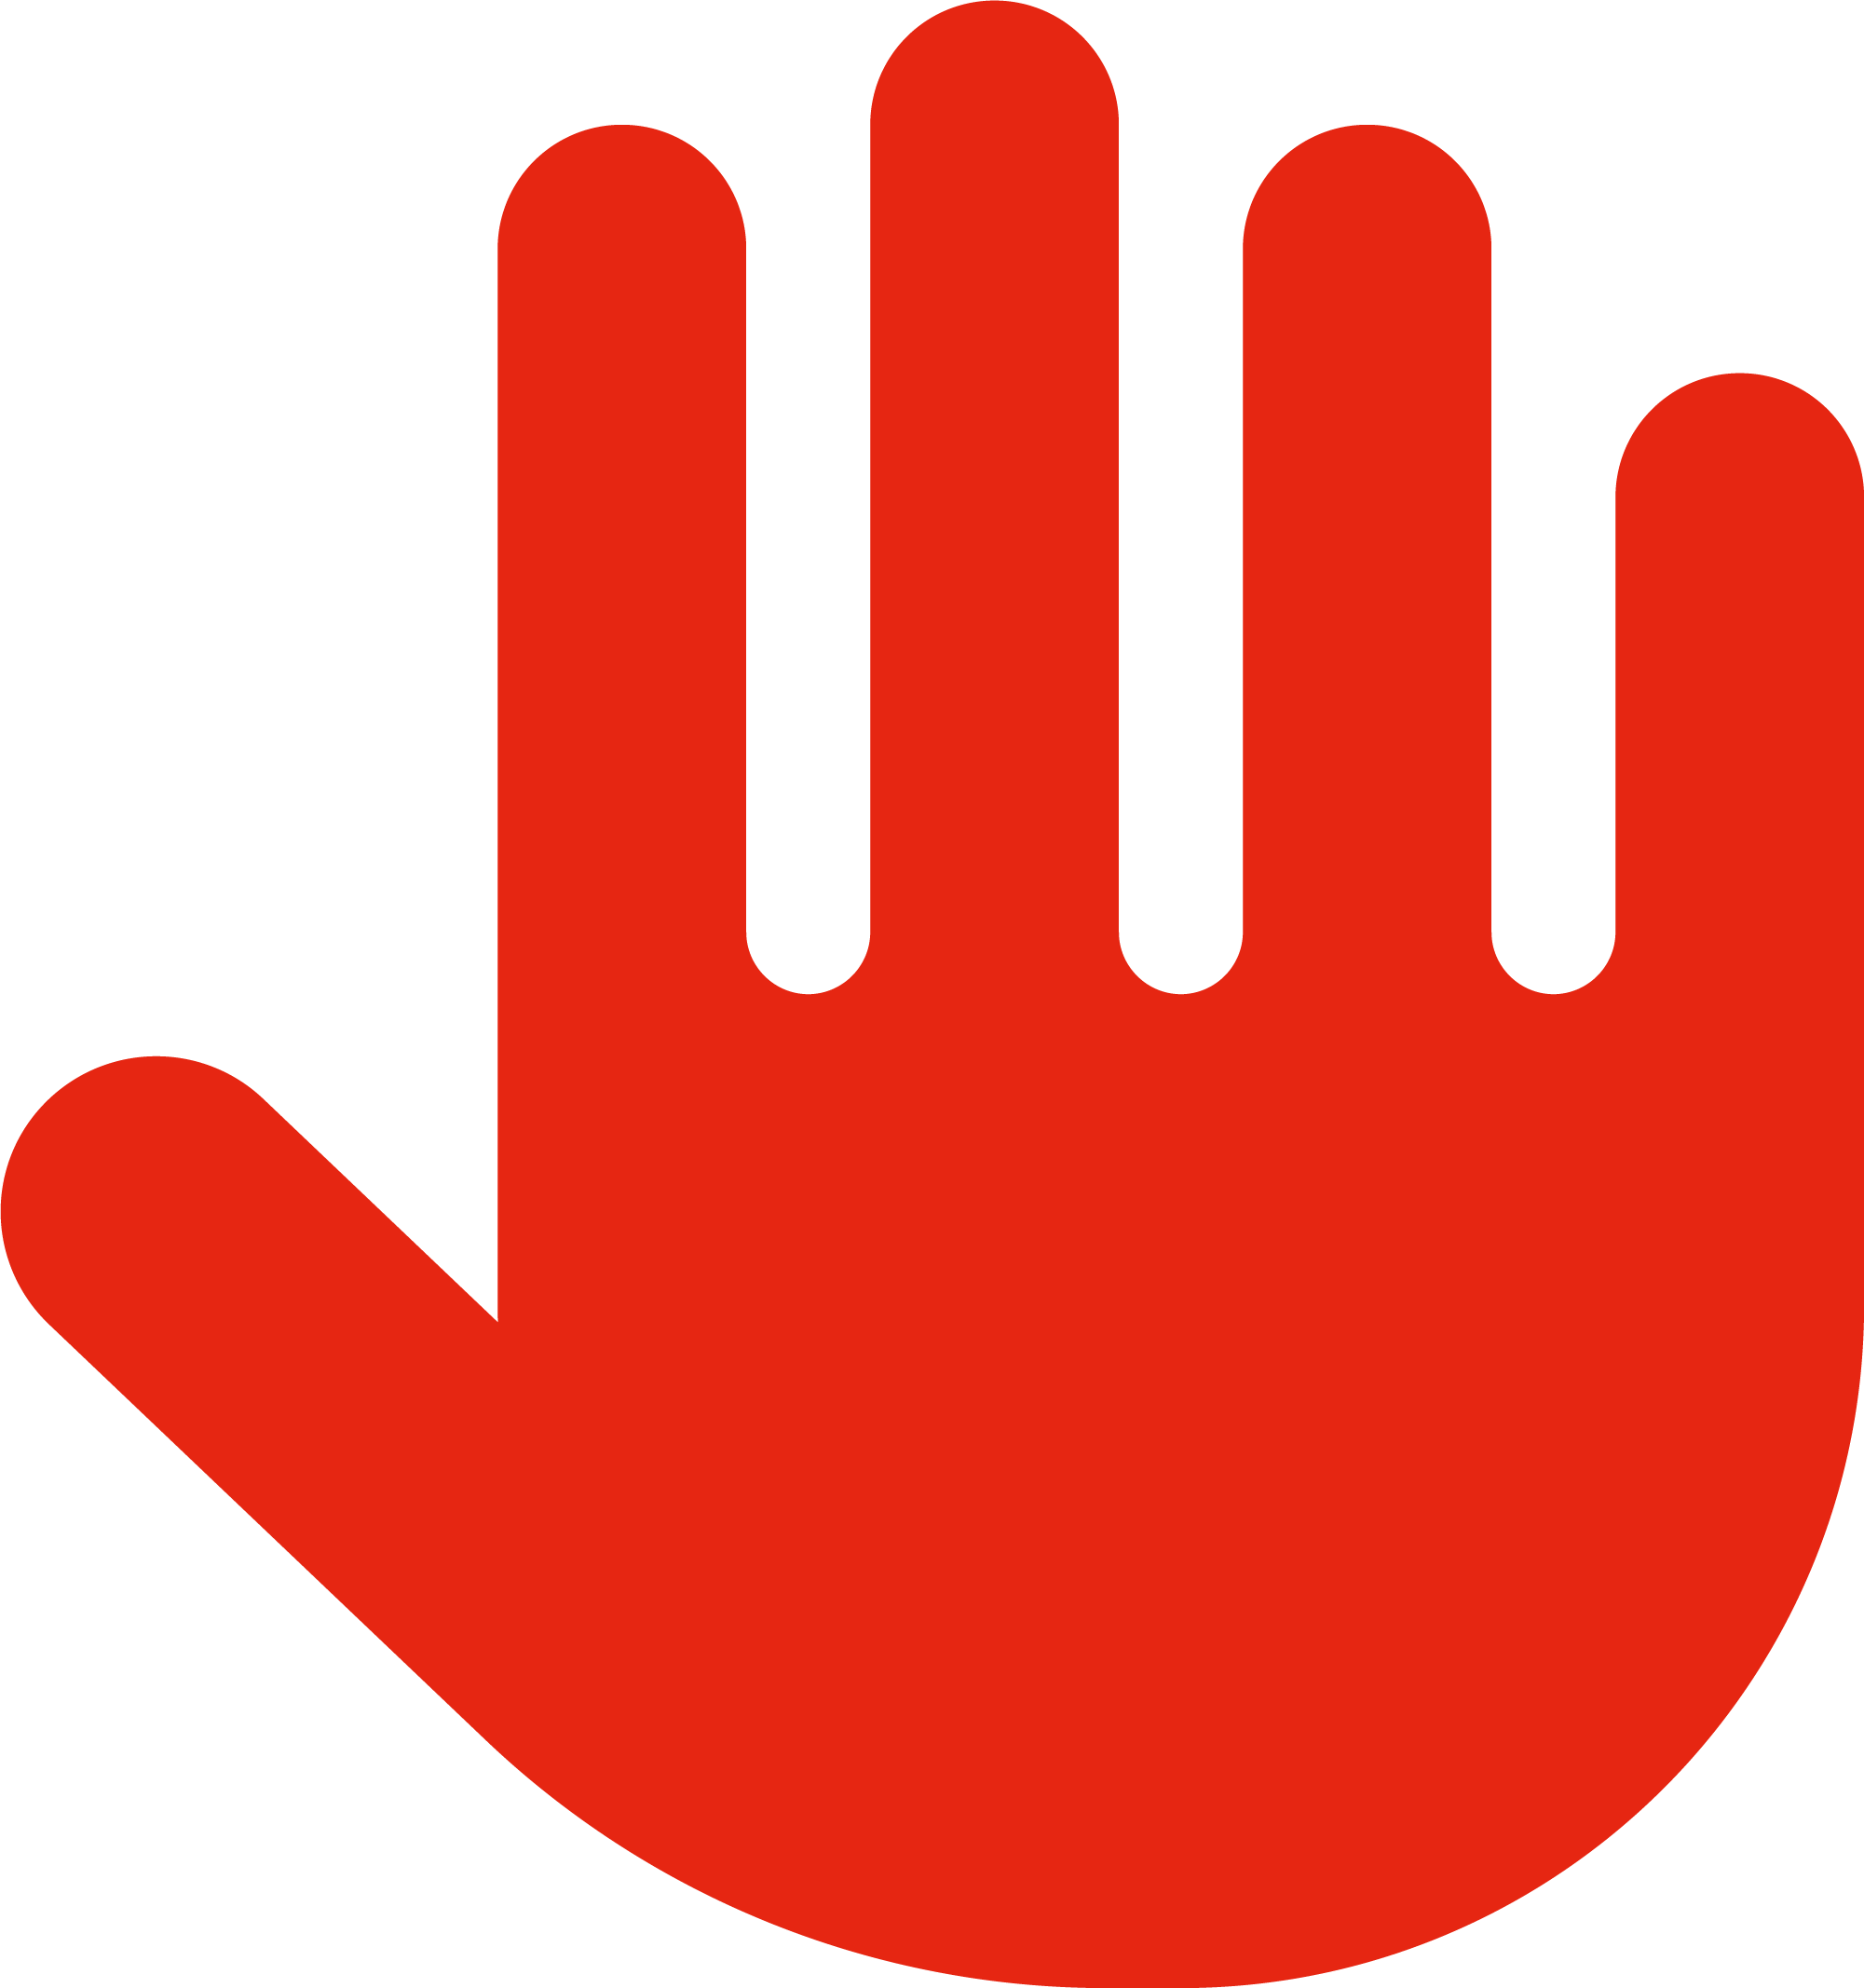 Red hand icon